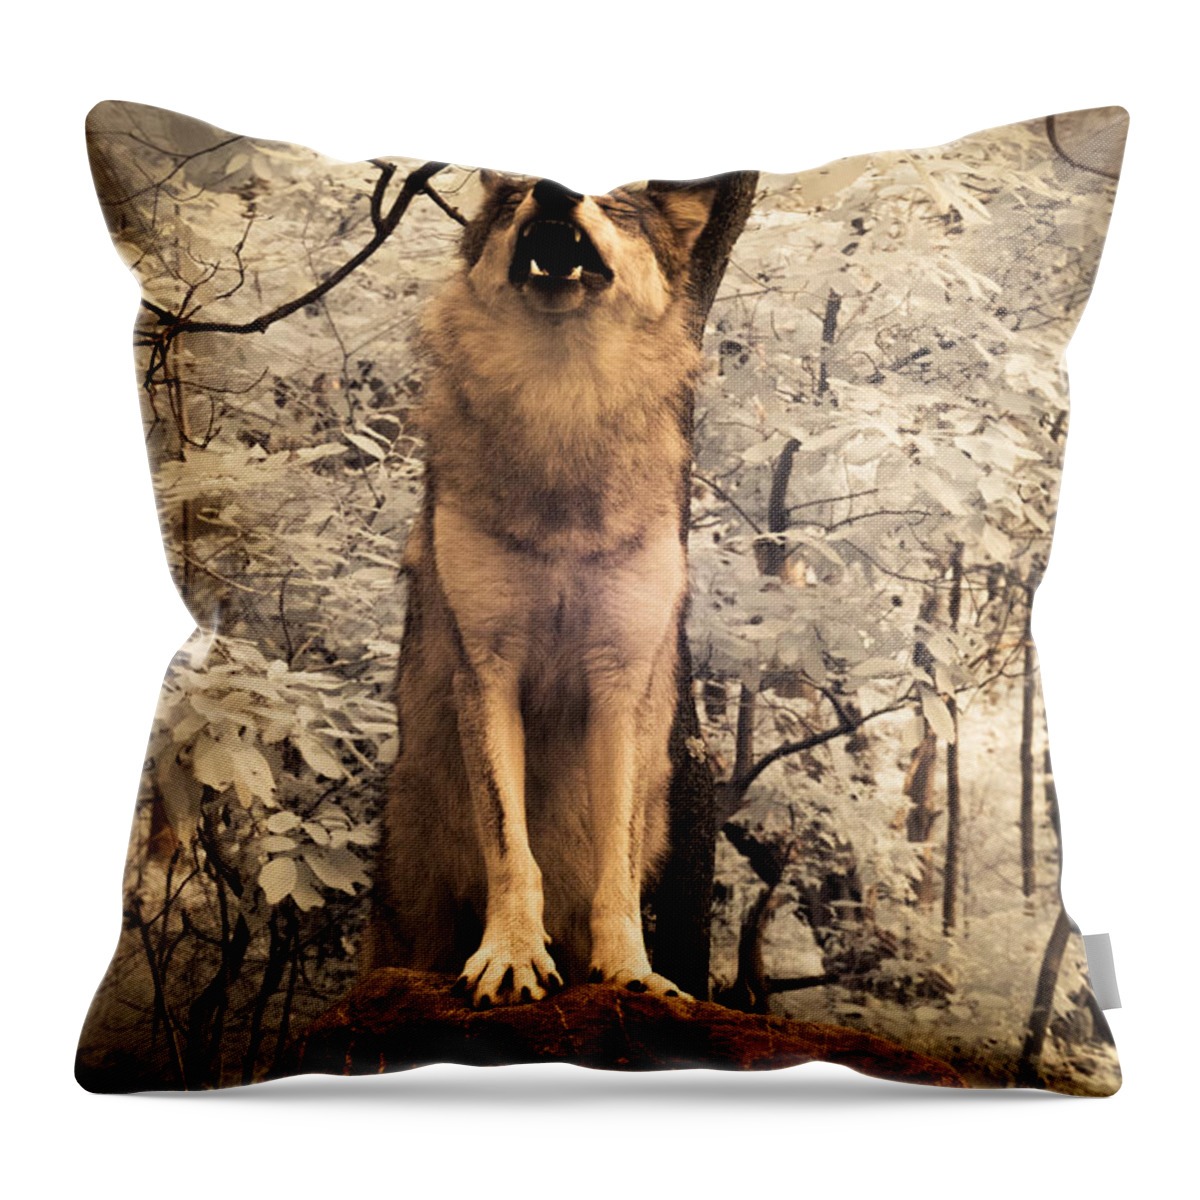 Singing A Soulful Tune Throw Pillow featuring the digital art Singing a Soulful Tune by William Fields